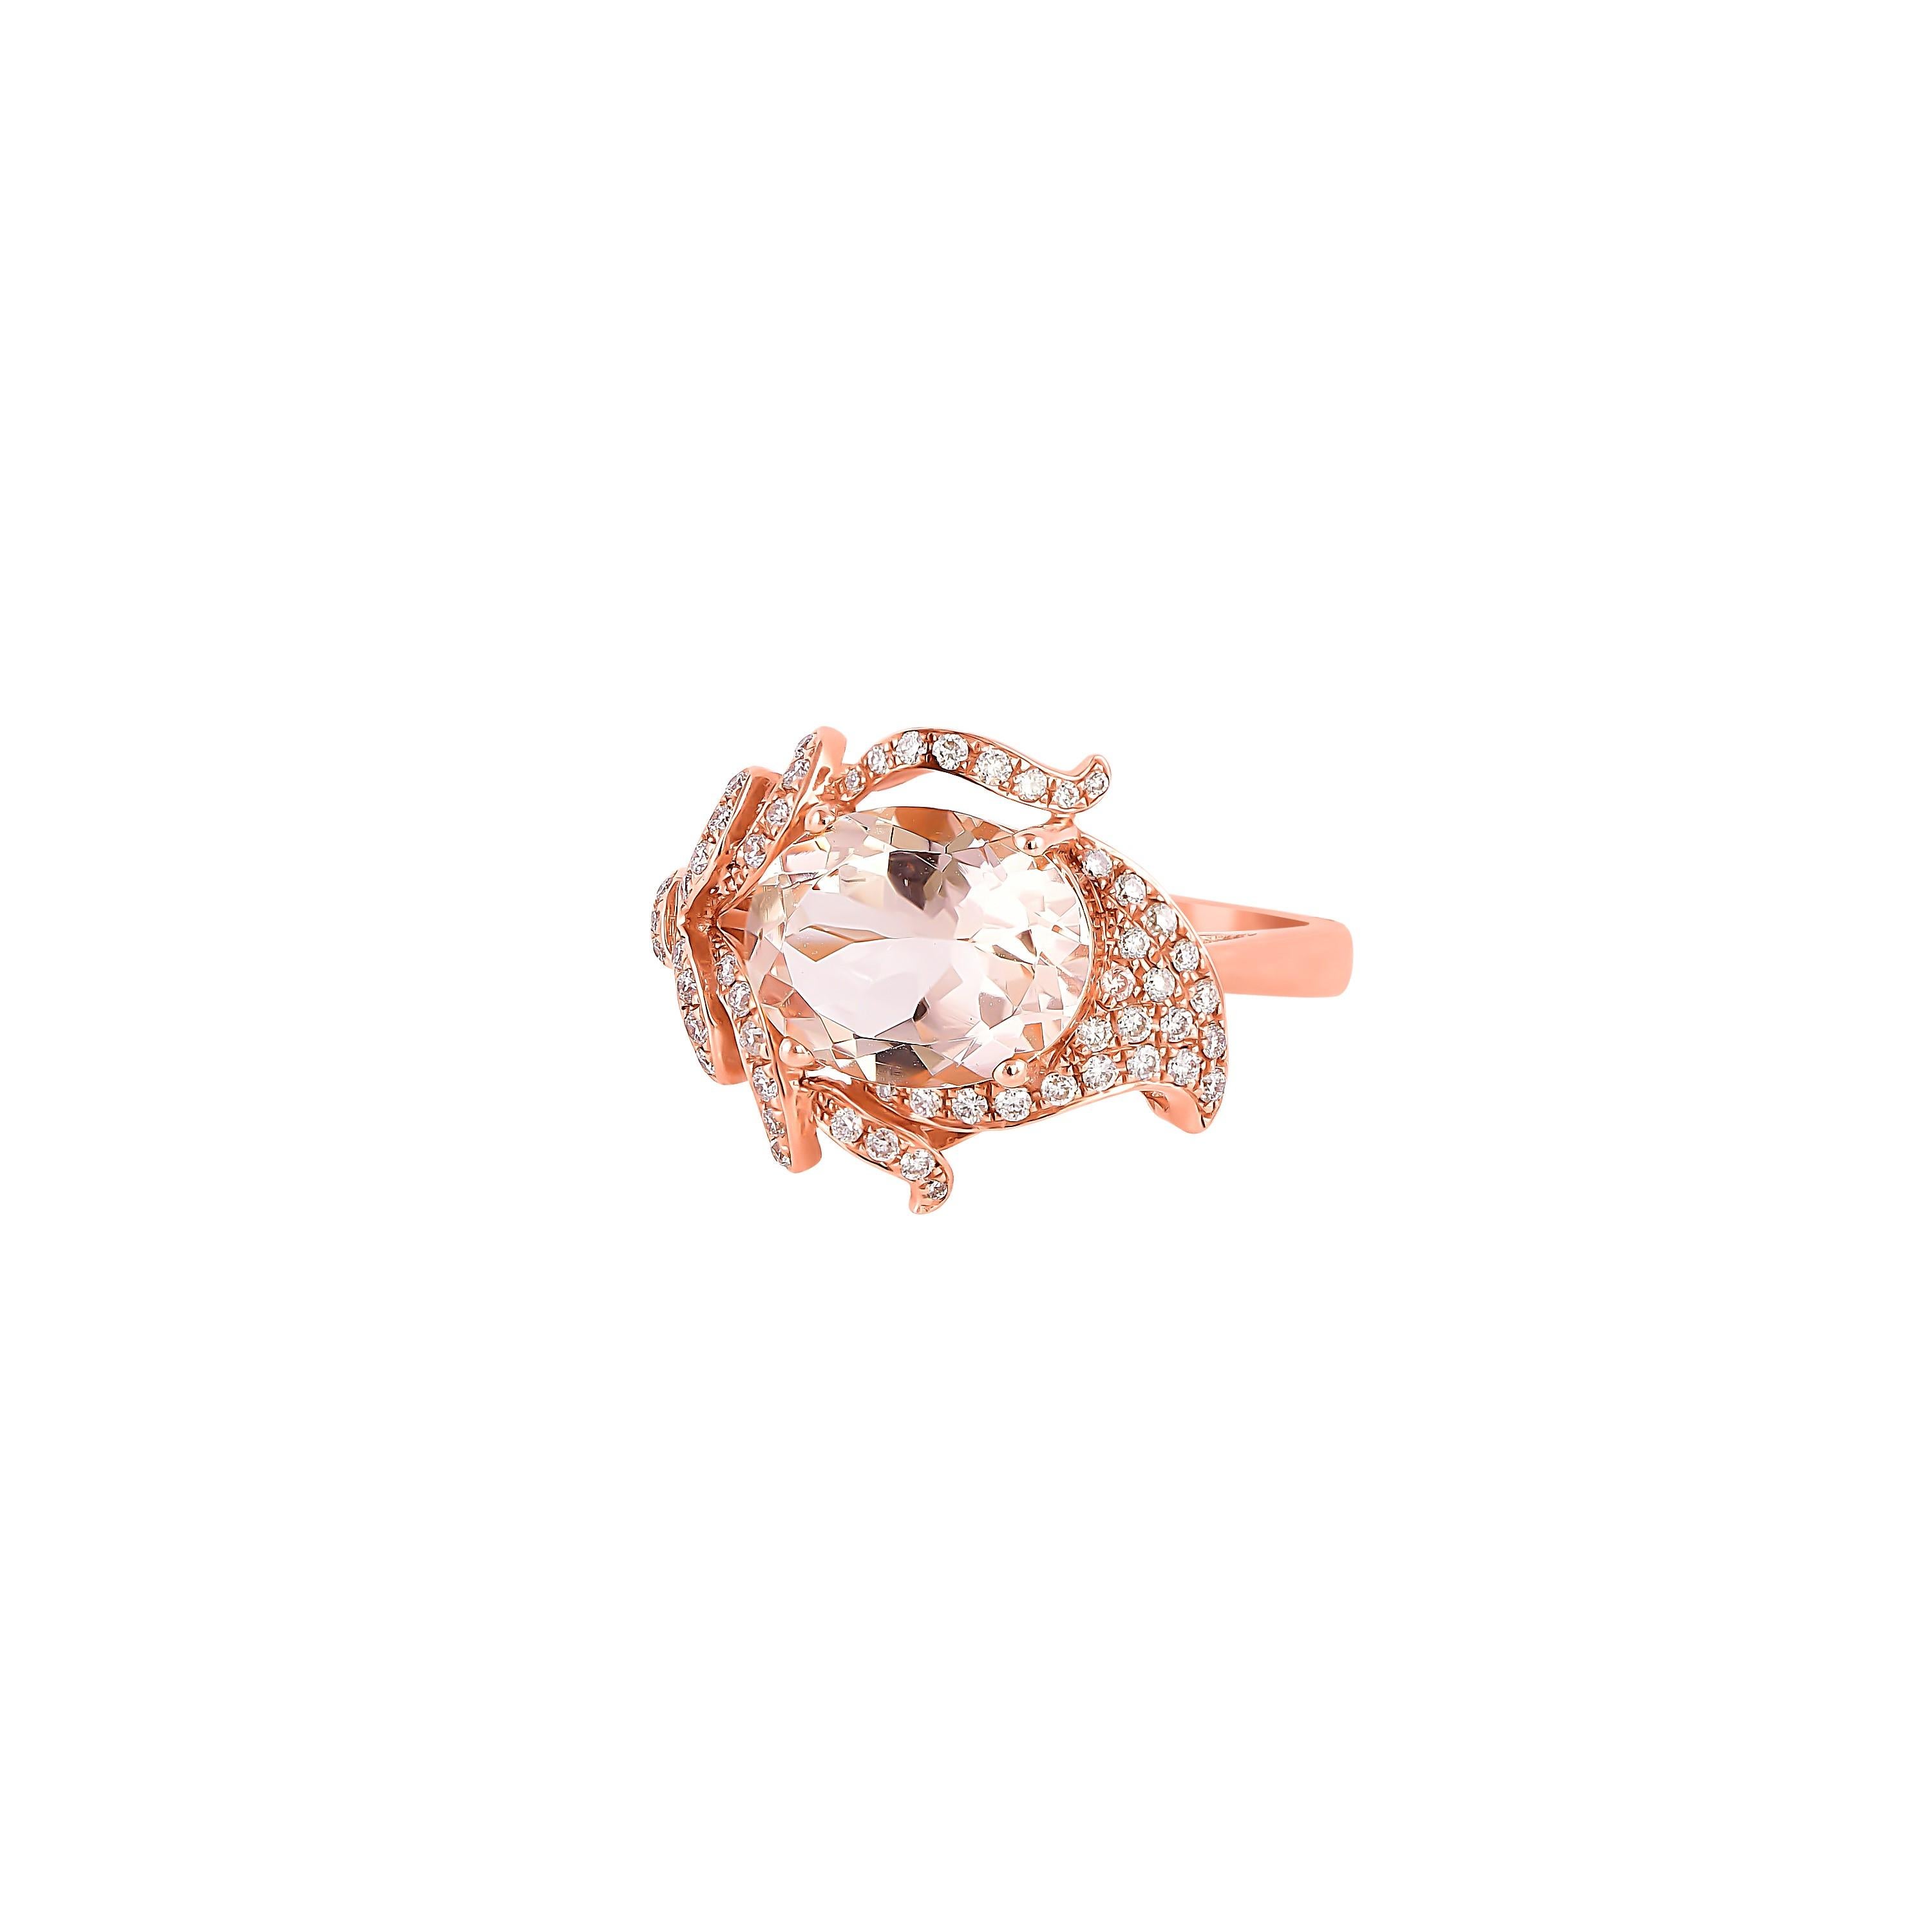 Oval Cut 2.17 Carat Morganite and Diamond Ring in 18 Karat Rose Gold For Sale